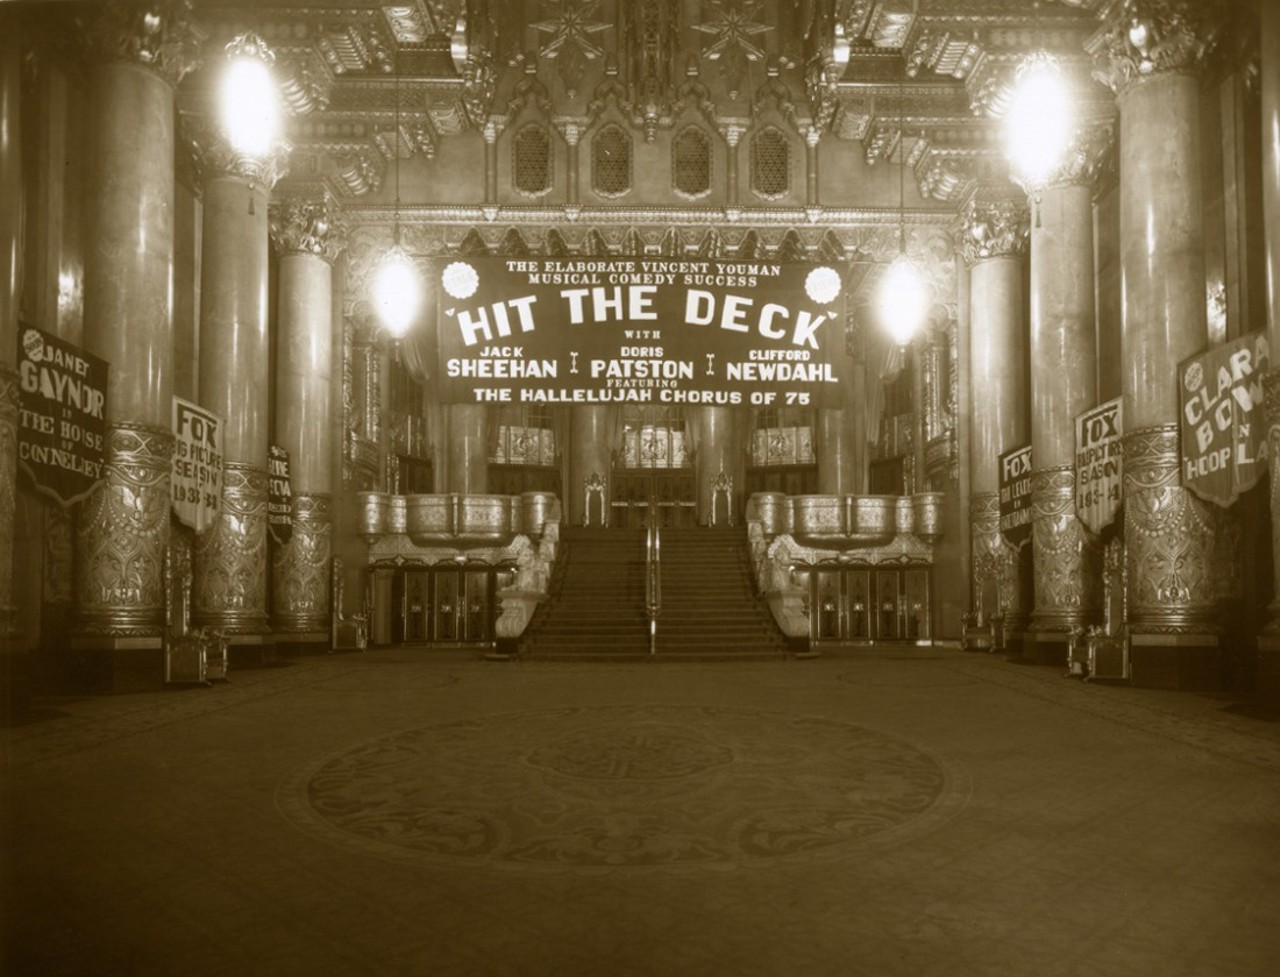 The Fox Theatre lobby, circa 1930. The Fox struggled after the stock market crash in 1929, and William Fox eventually went bankrupt in 1936. Photo by Sievers Photograph.